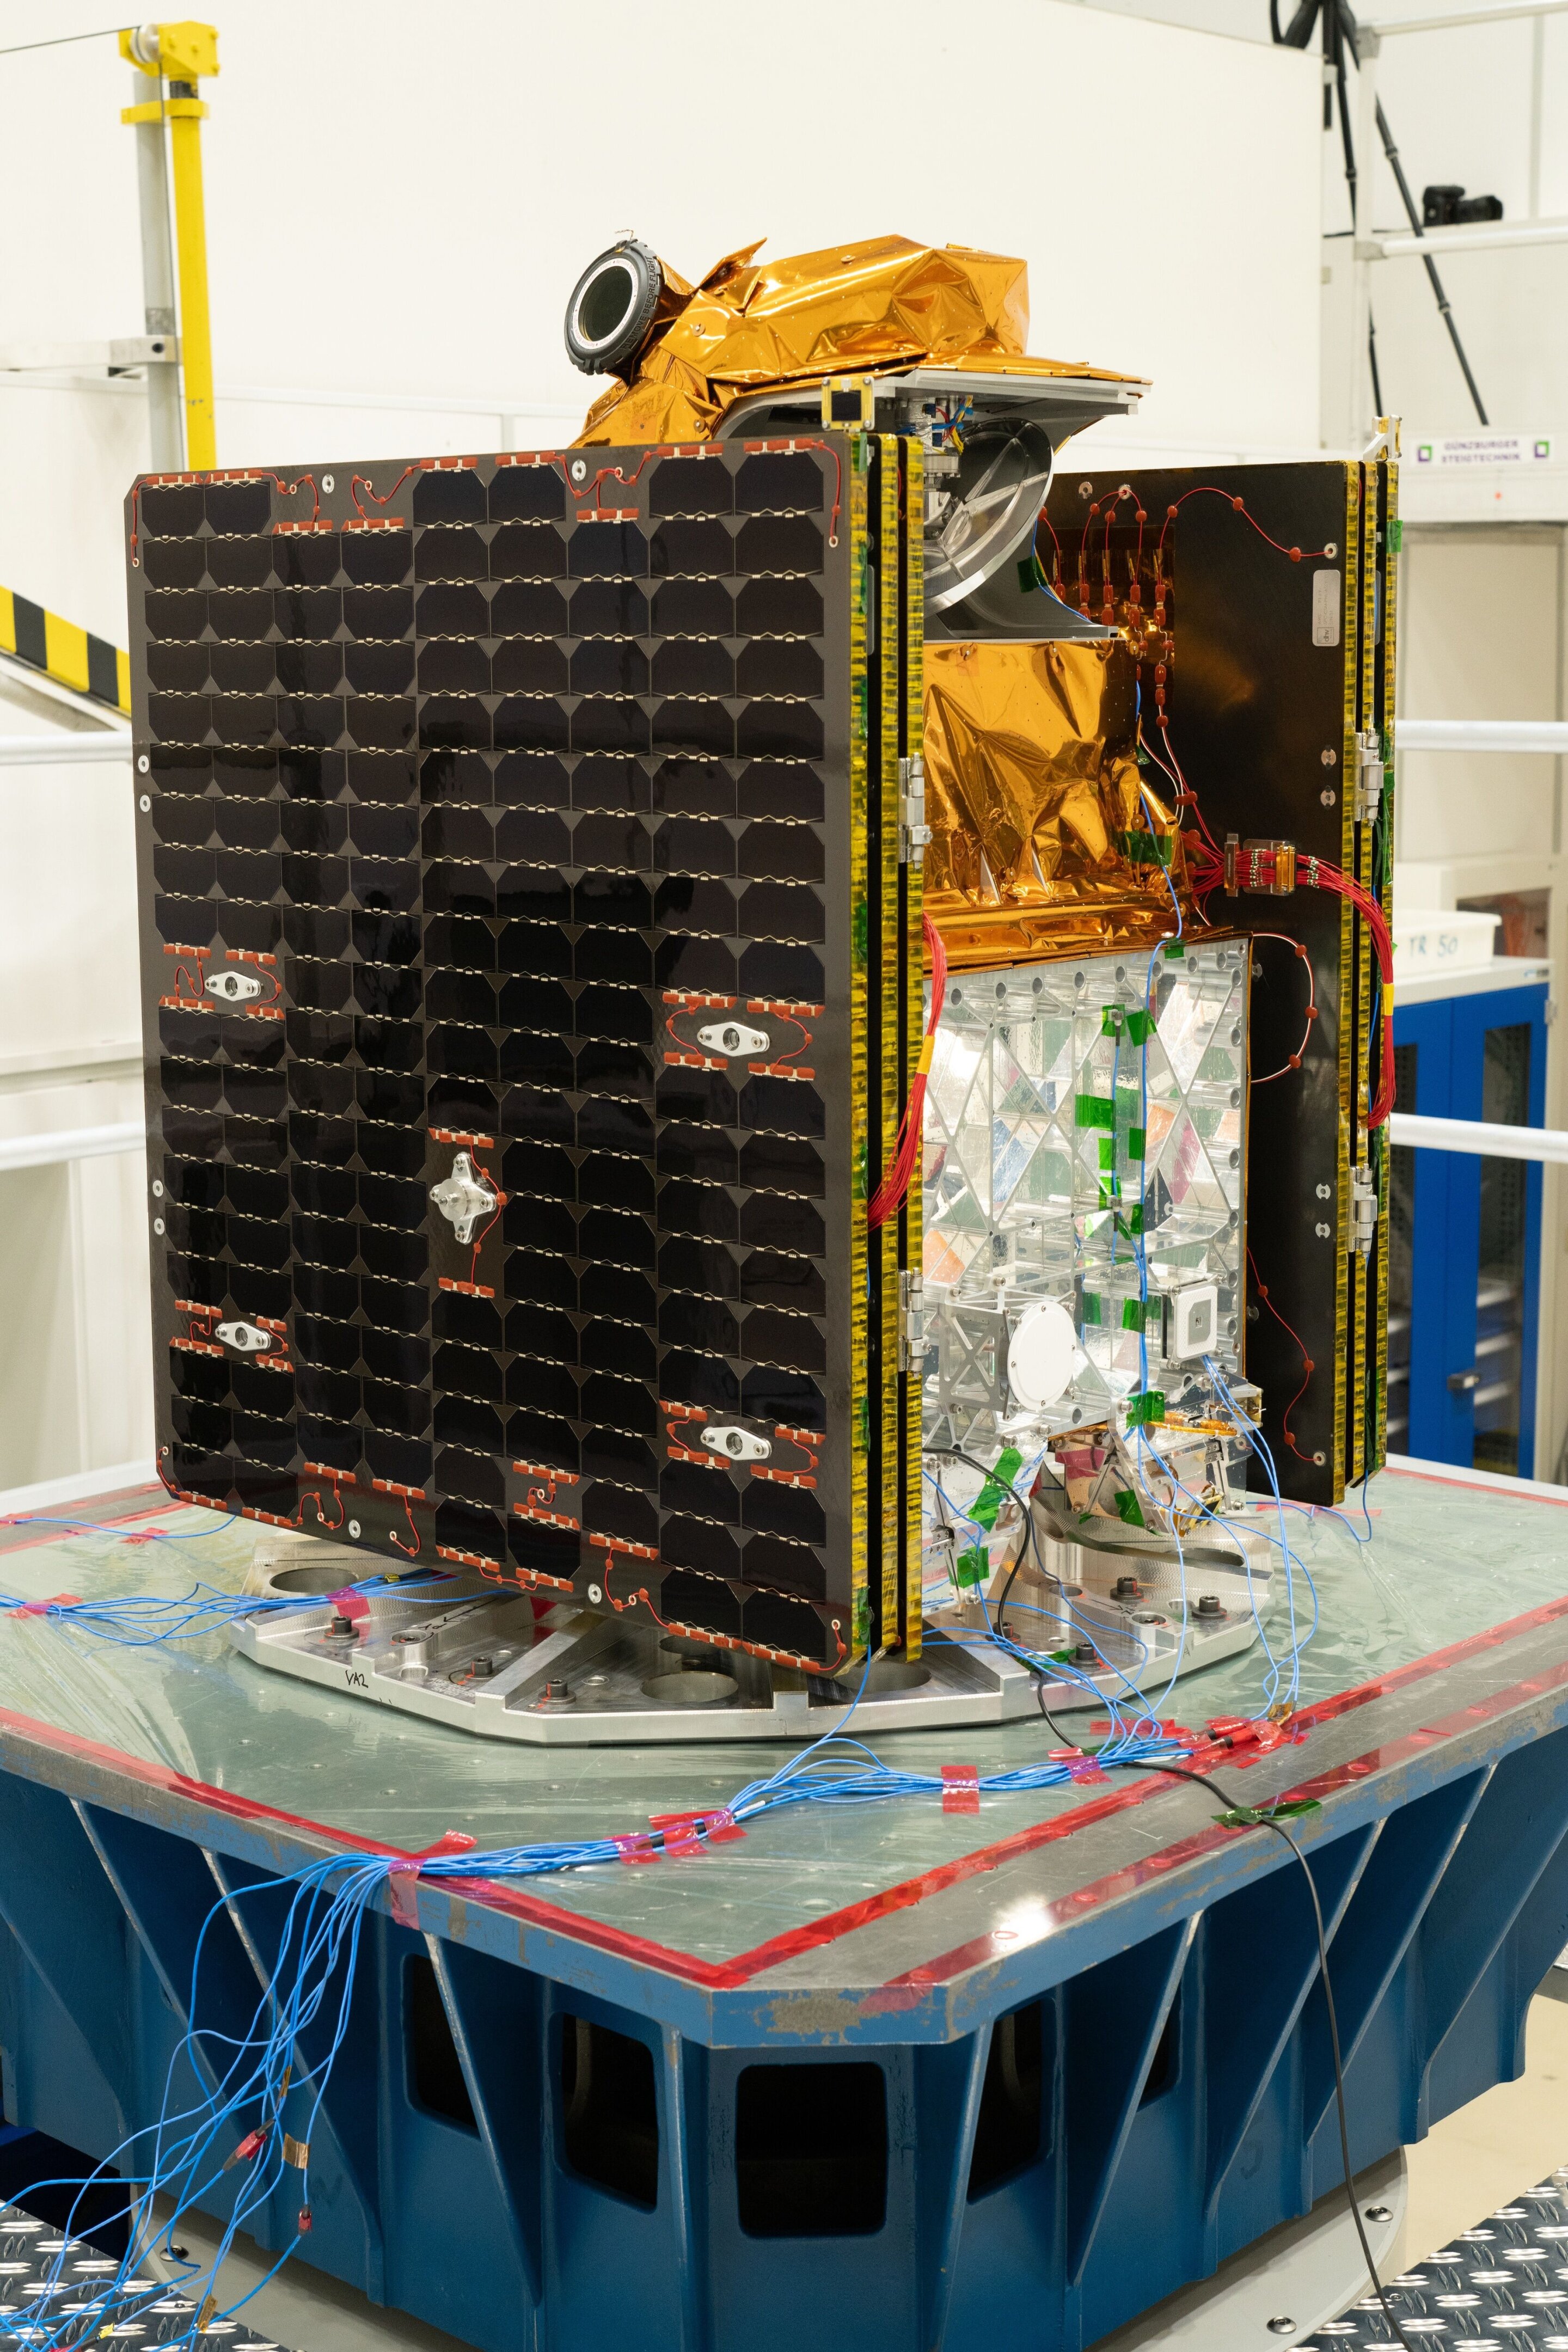 #Arctic Weather Satellite tested for life in orbit